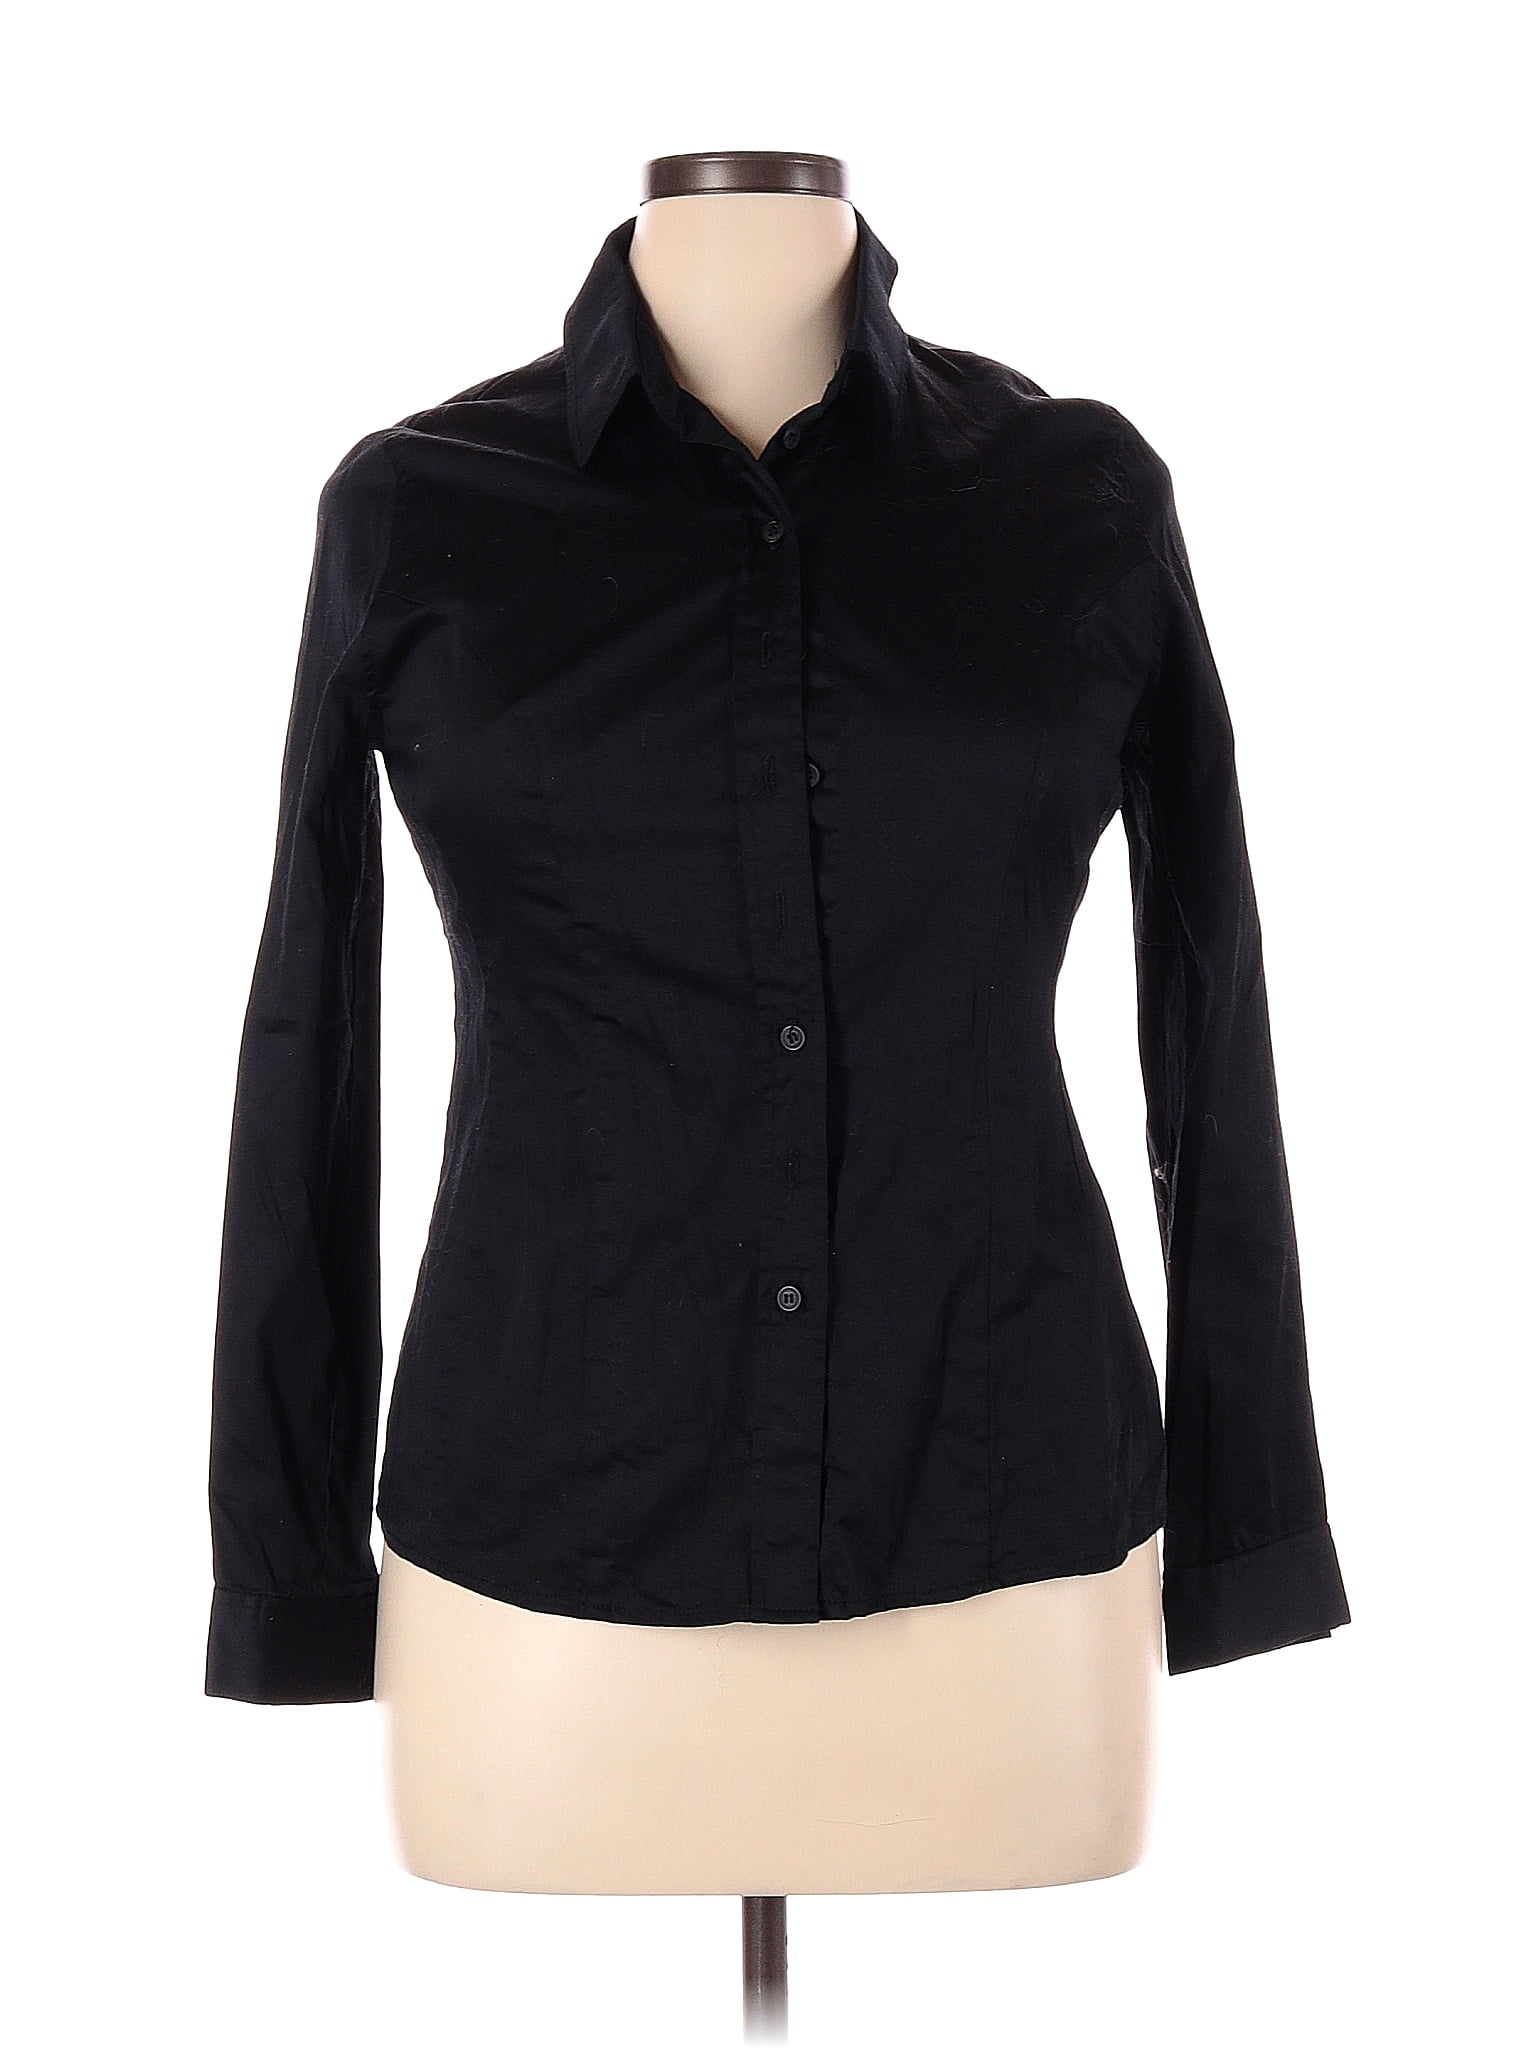 Bravissimo Solid Black Long Sleeve Button-Down Shirt Size 14 - 73% off